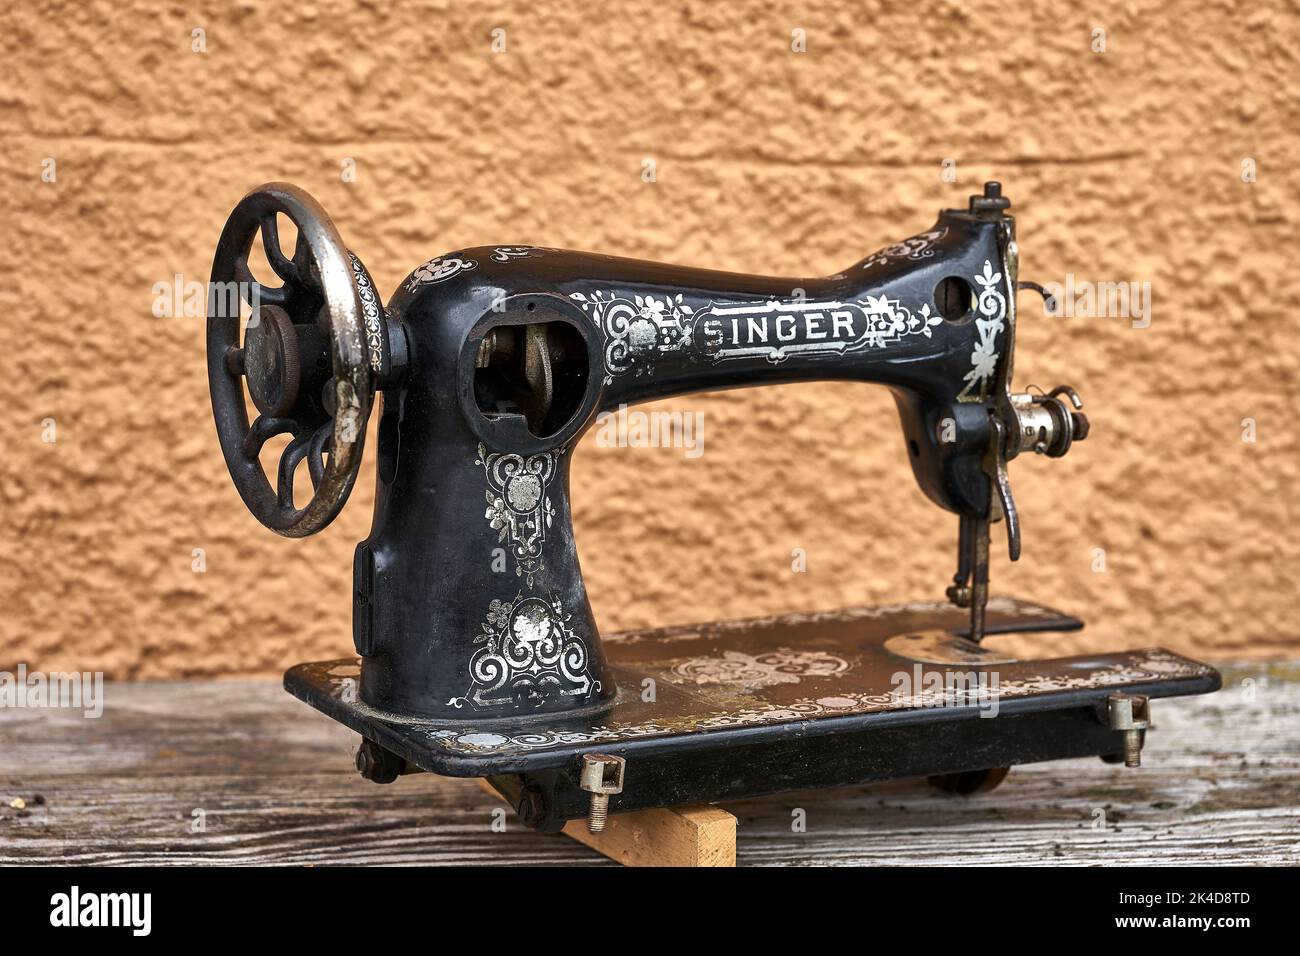 old sewing machine that has seen better times Stock Photo